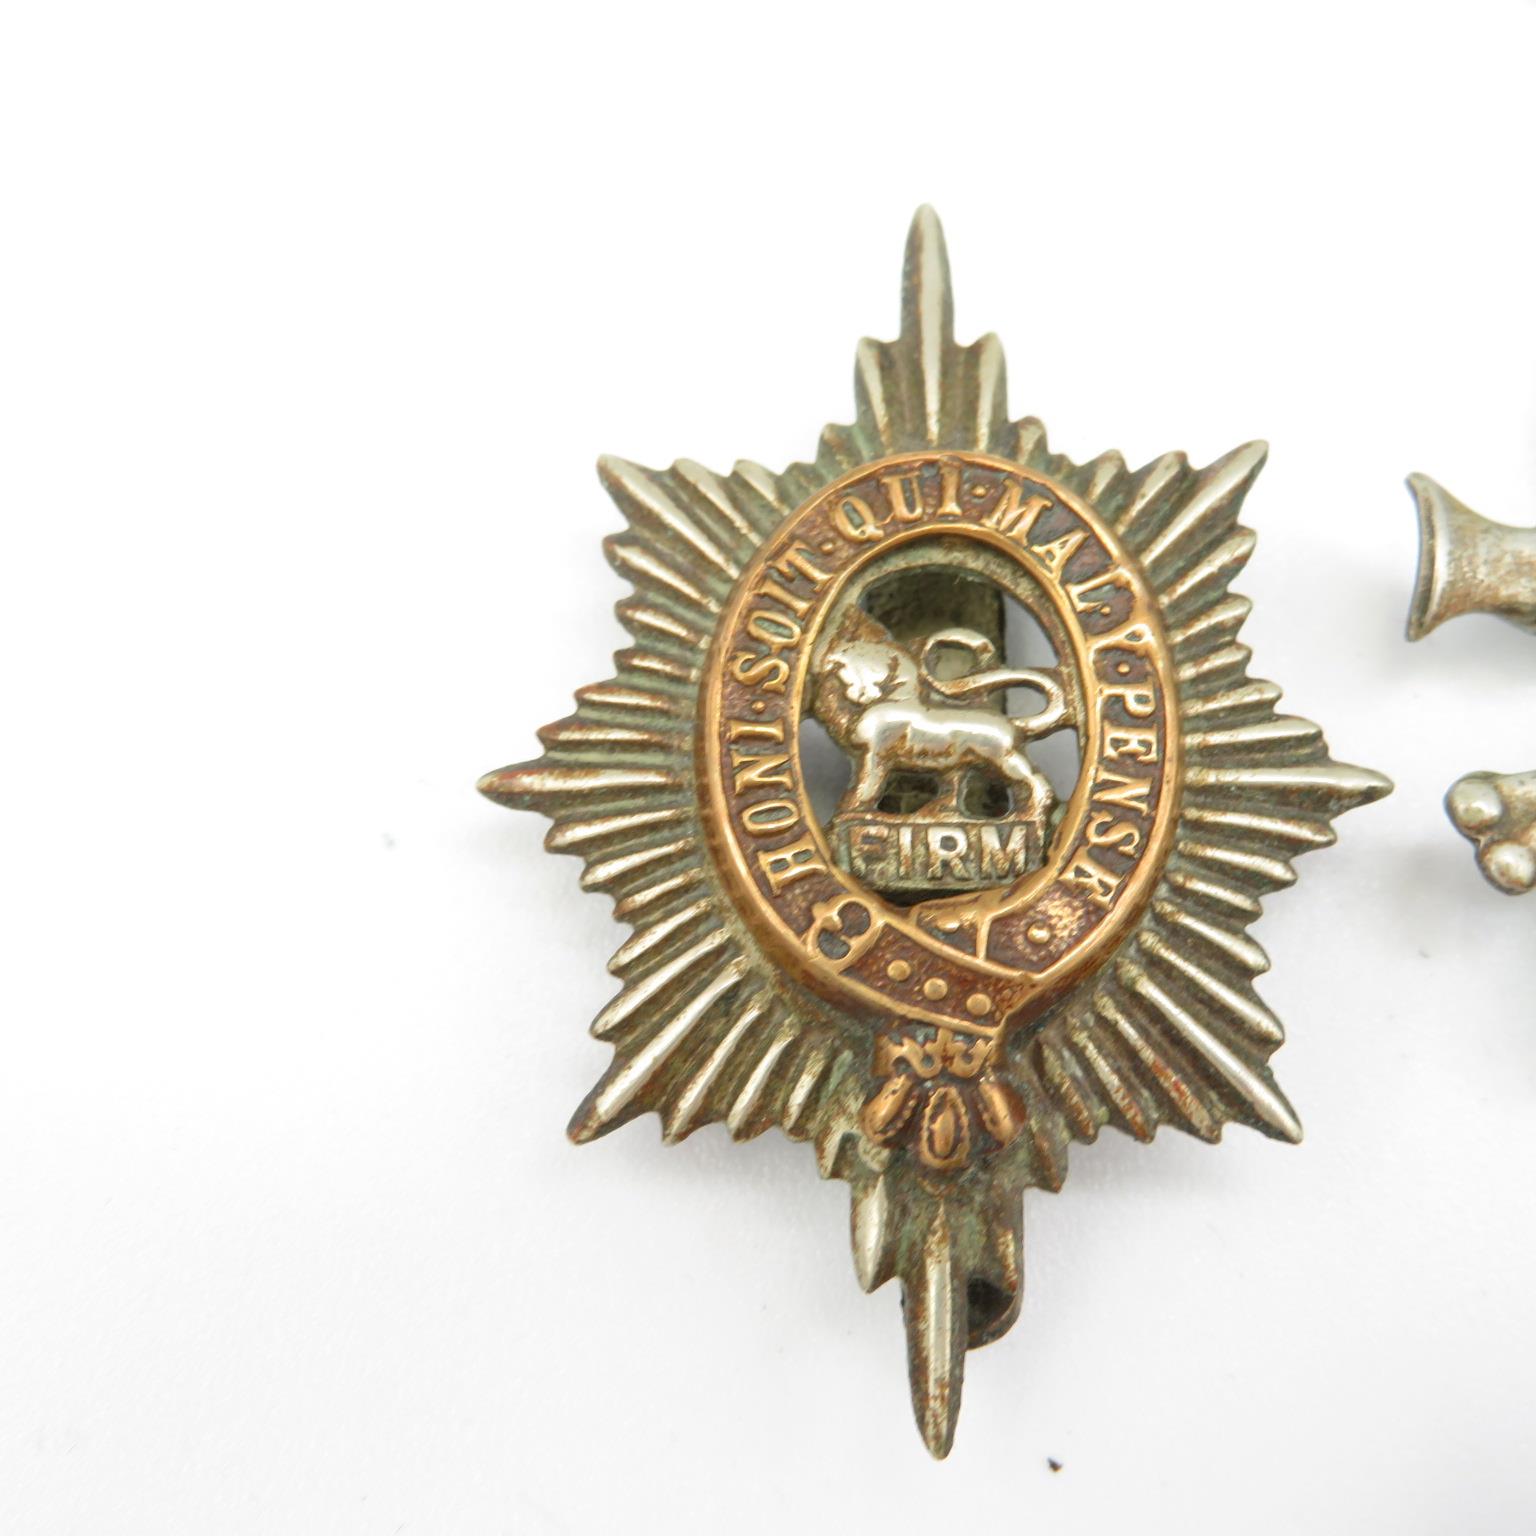 18x Military cap badges including Royal Scots Fusiliers and Lancers etc. - - Image 7 of 19